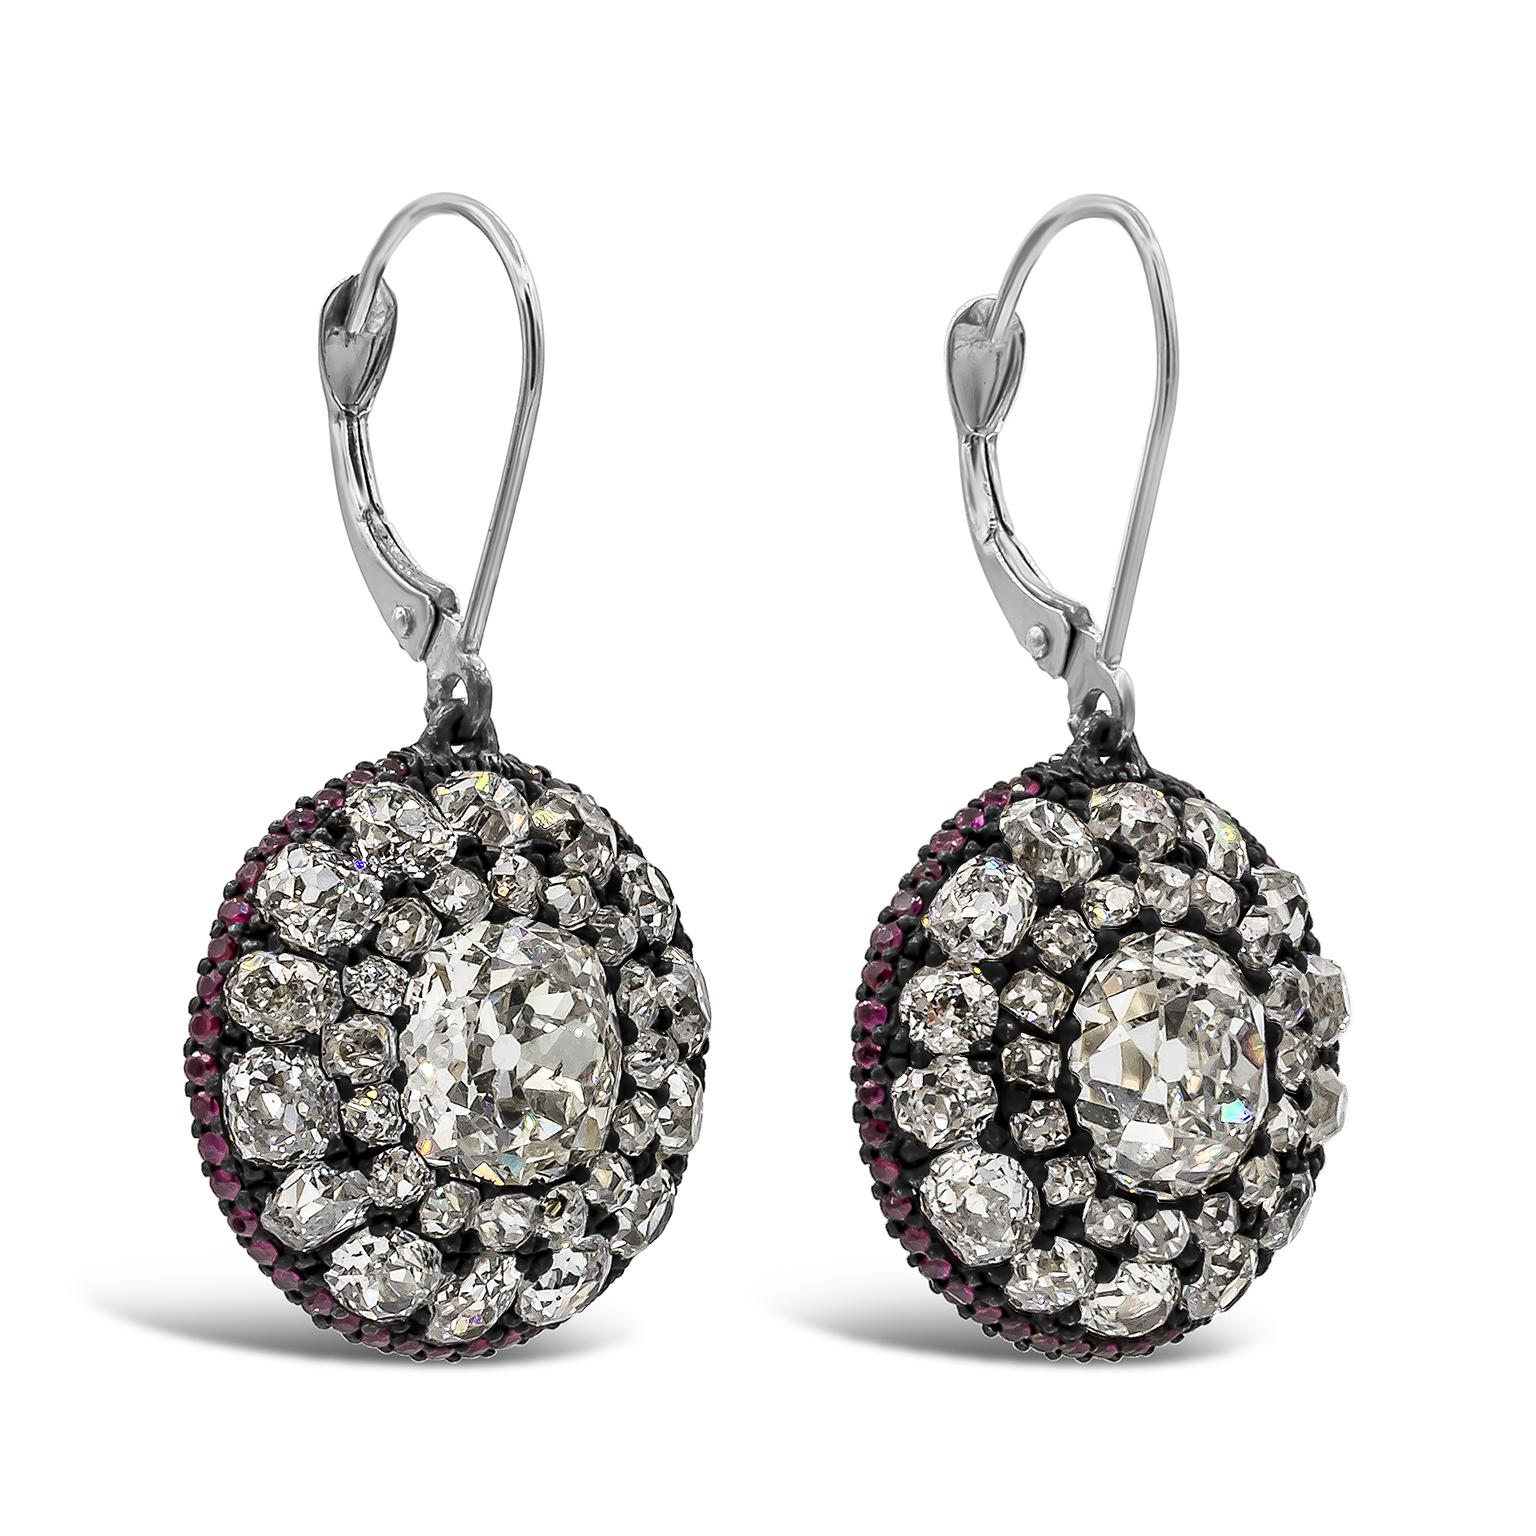 A contemporary antique pair of drop earrings showcasing two gorgeous old mine cut diamonds weighing 2.18 and 1.75 carats, surrounded by a row of old mine cut diamonds. Accent diamonds weighing 5.20 carats total. Finished with ruby diamonds weighing